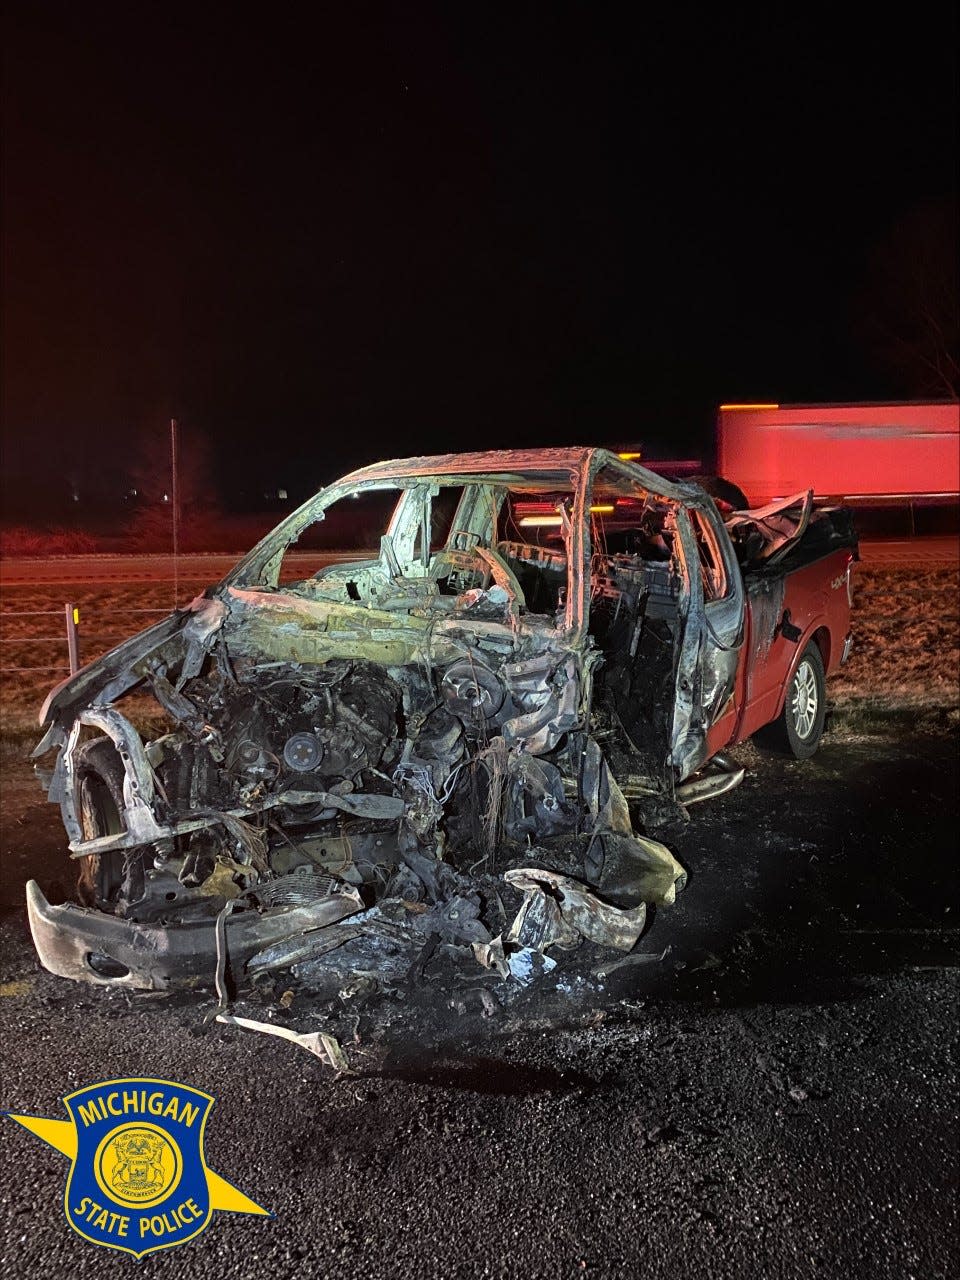 Three people were killed in a head-on crash early Monday on westbound I-94 in Marengo Township.